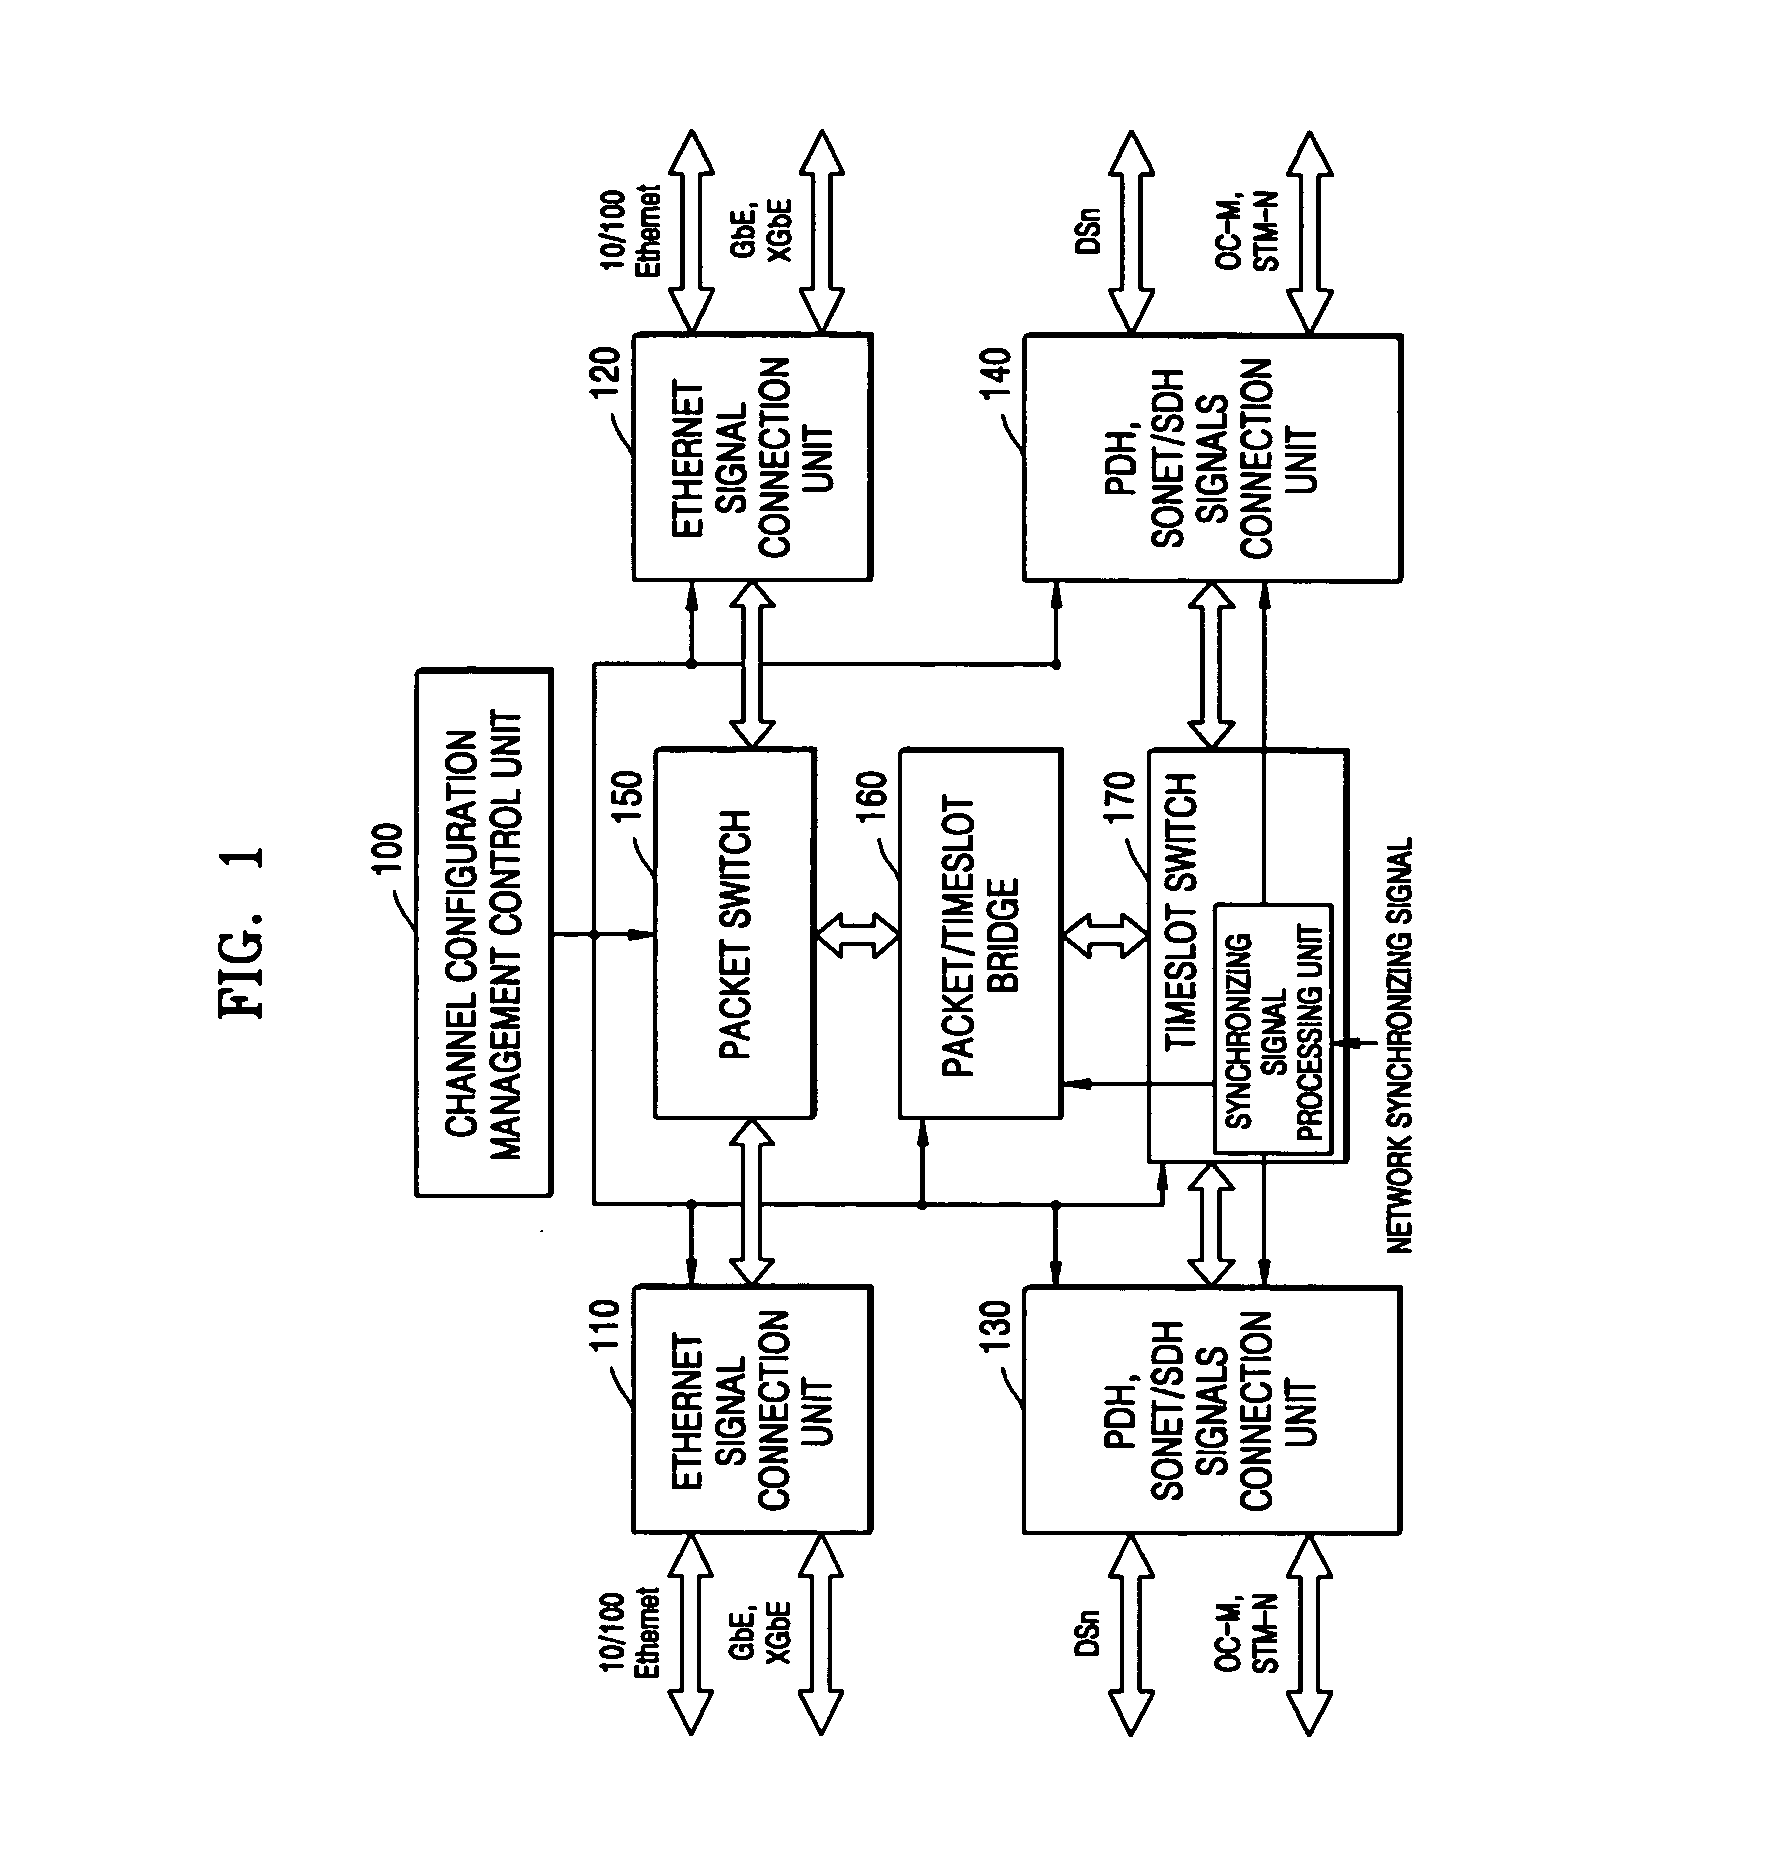 Apparatus for and method of integrating switching and transferring of SONET/SDH, PDH, and Ethernet signals